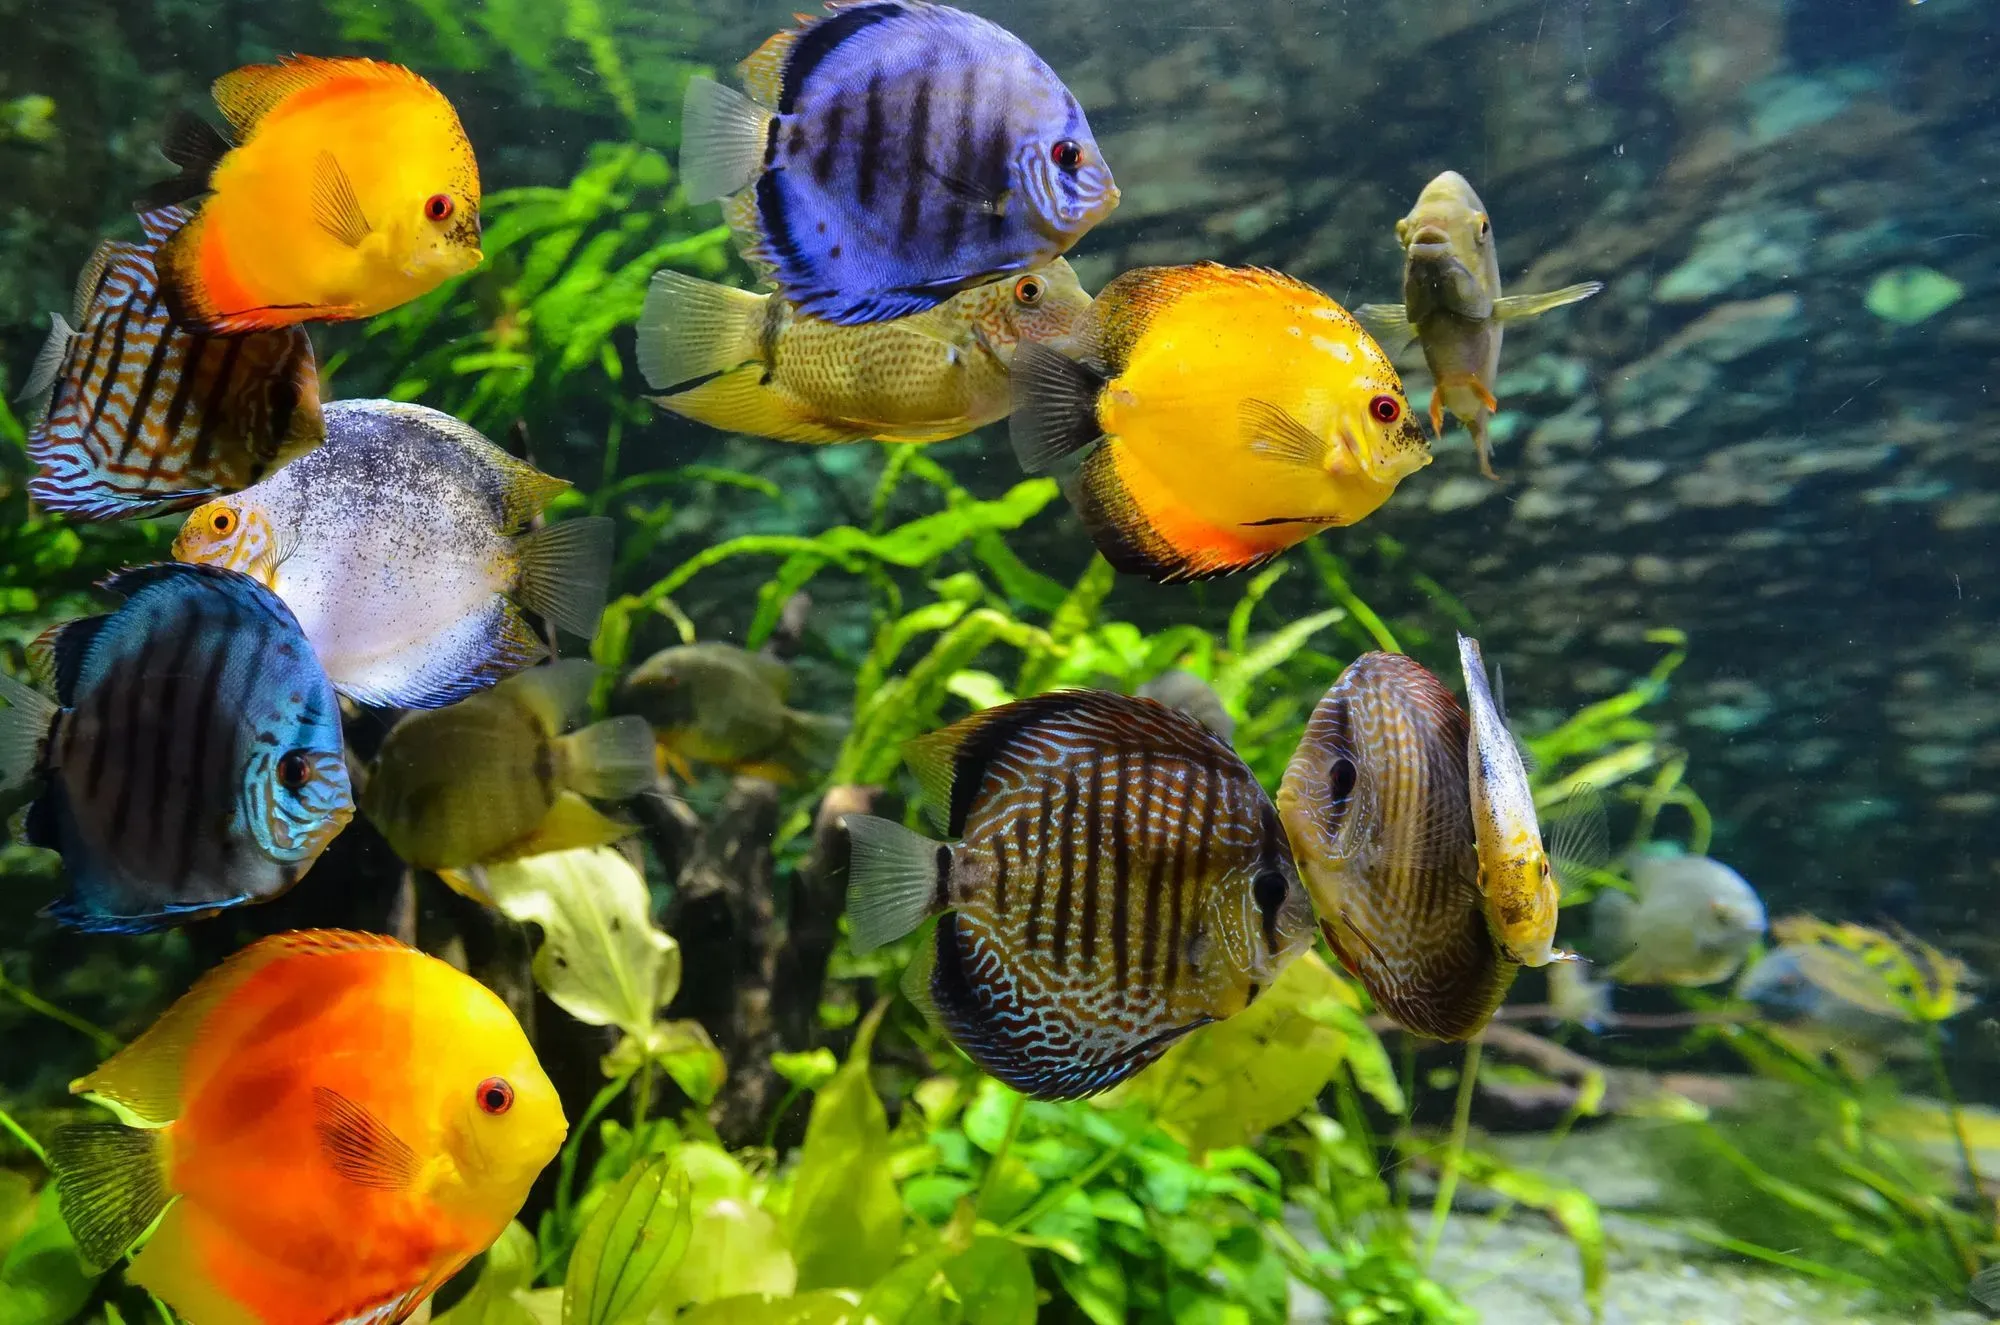 Read this amazing care guide on how to take care of a fish and keep it happy and healthy.